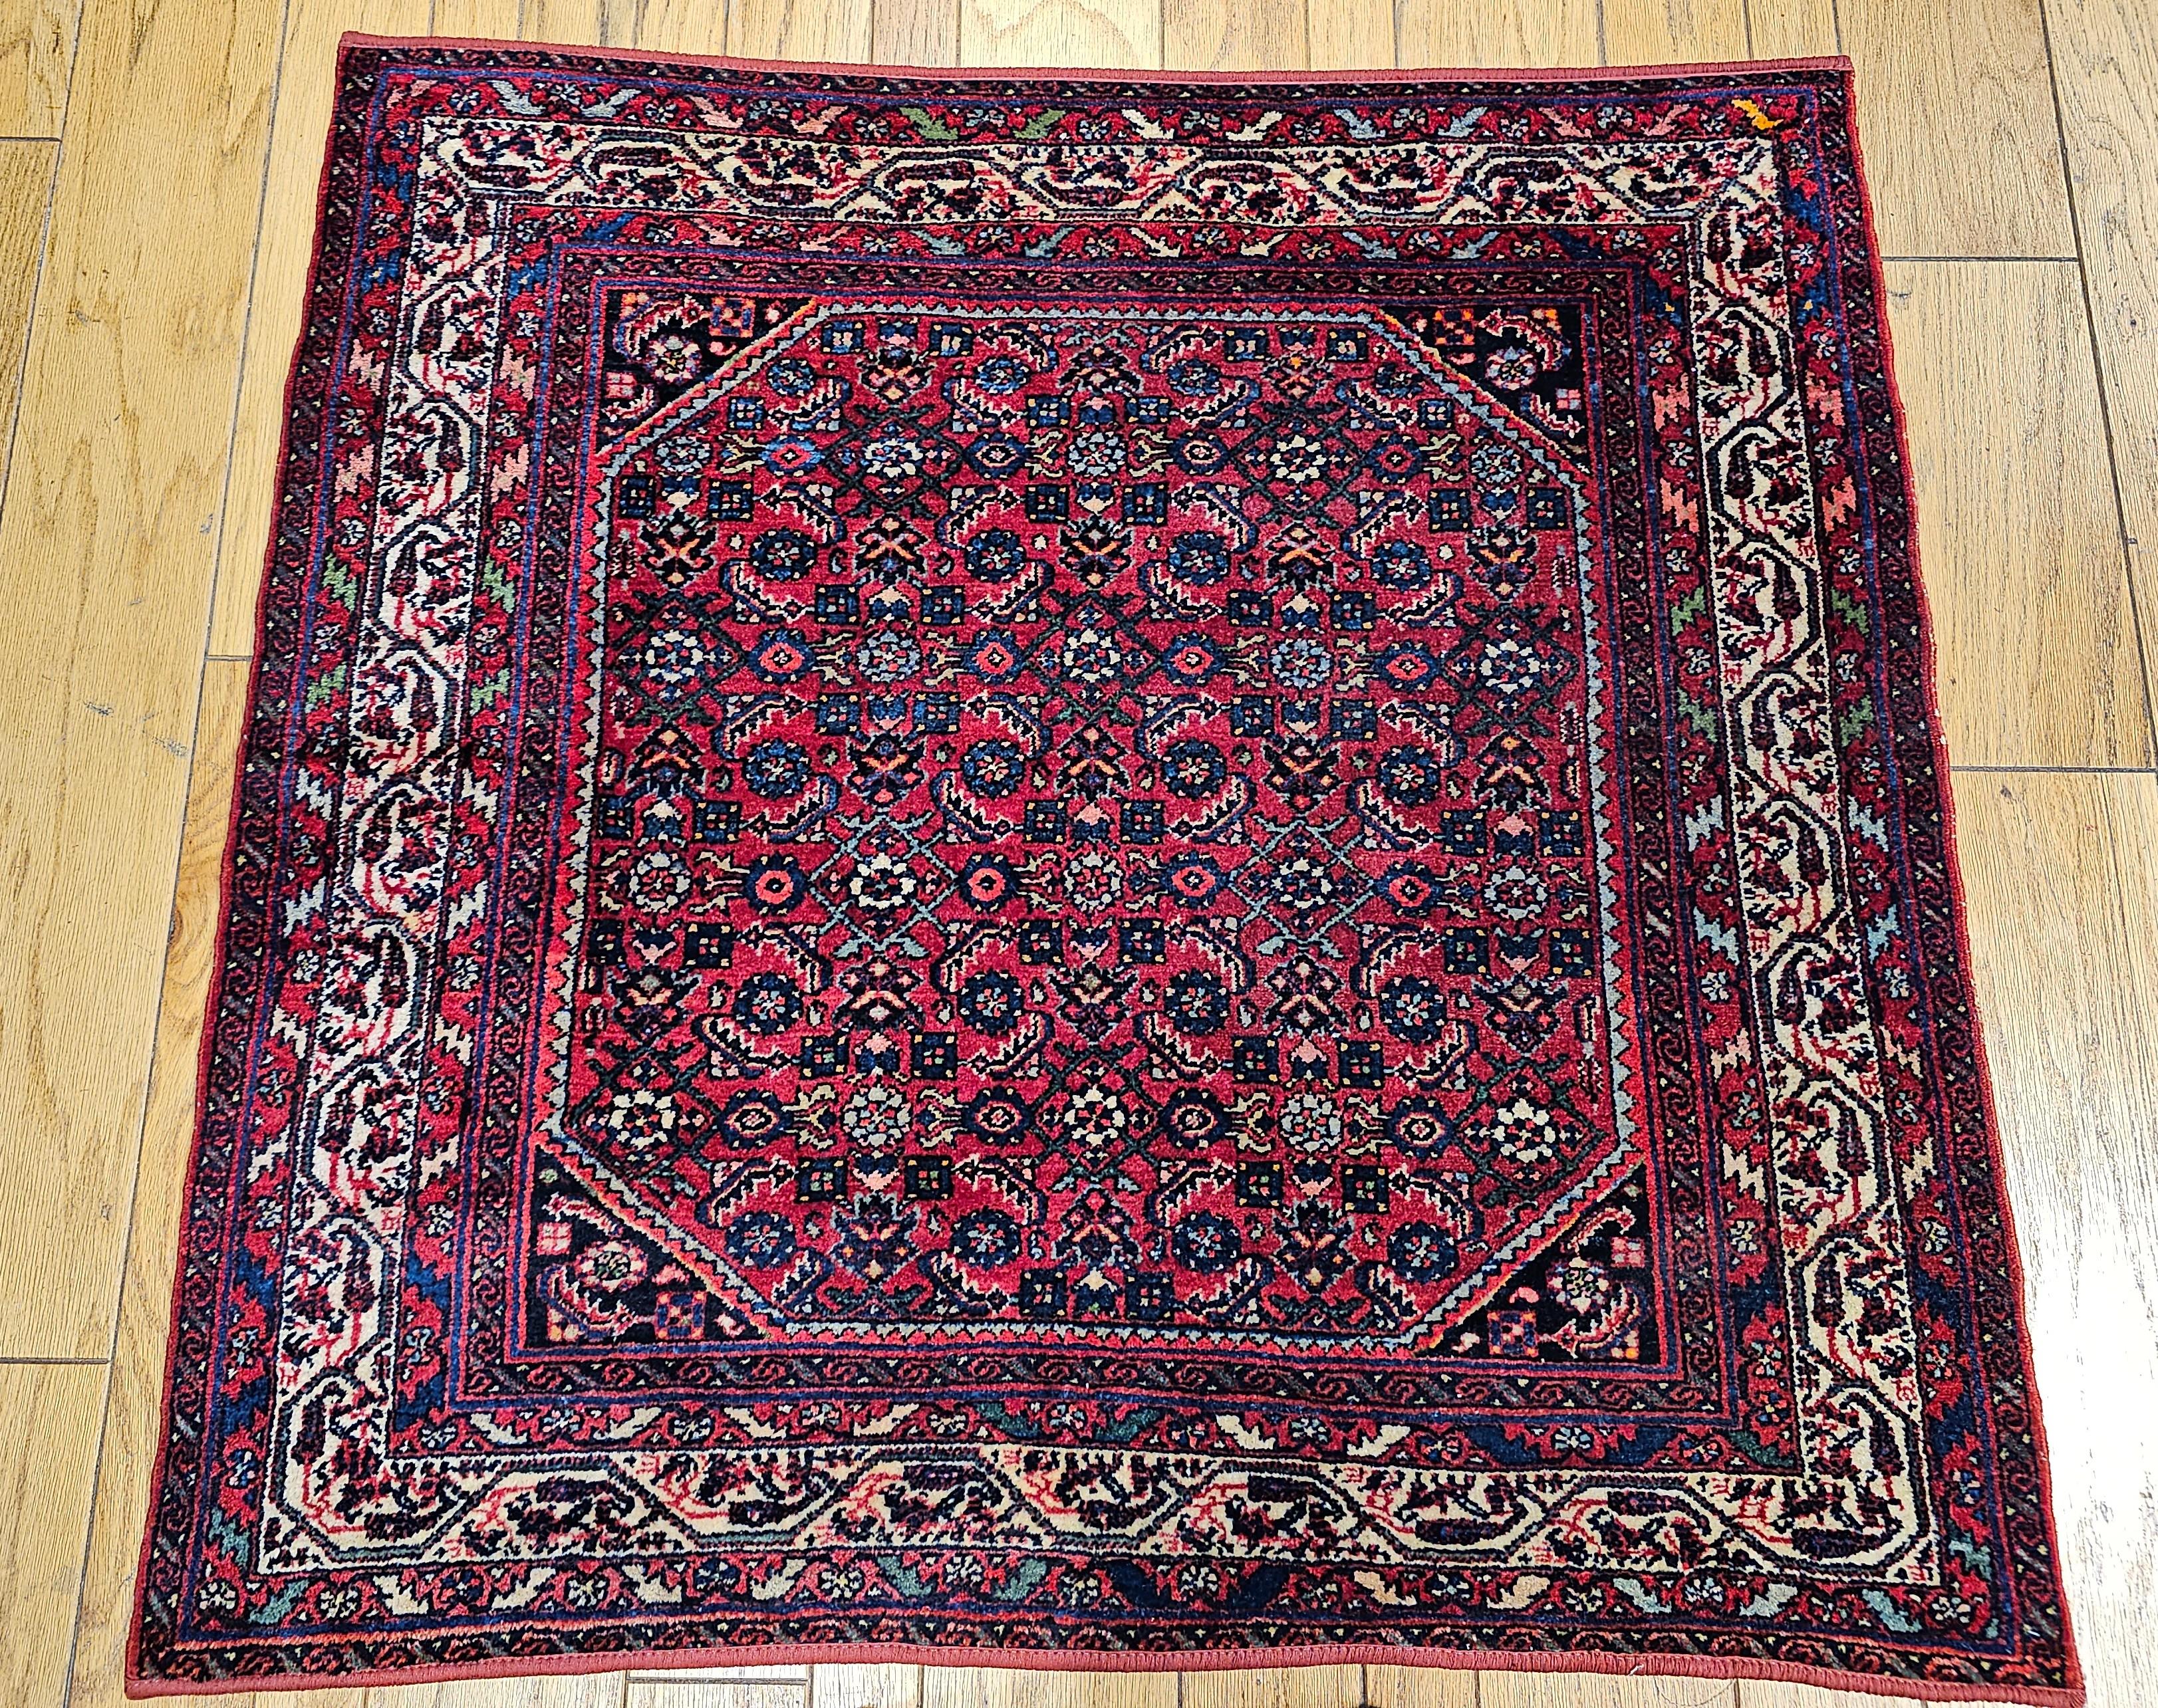 Square size vintage Persian Malayer rug is in an all-over Herati pattern.  The rug has a red background and an ivory color border with small corner spandrels in navy blue. The rare square size makes the rug very desirable.
Dimensions:  4’ 2” x 4’